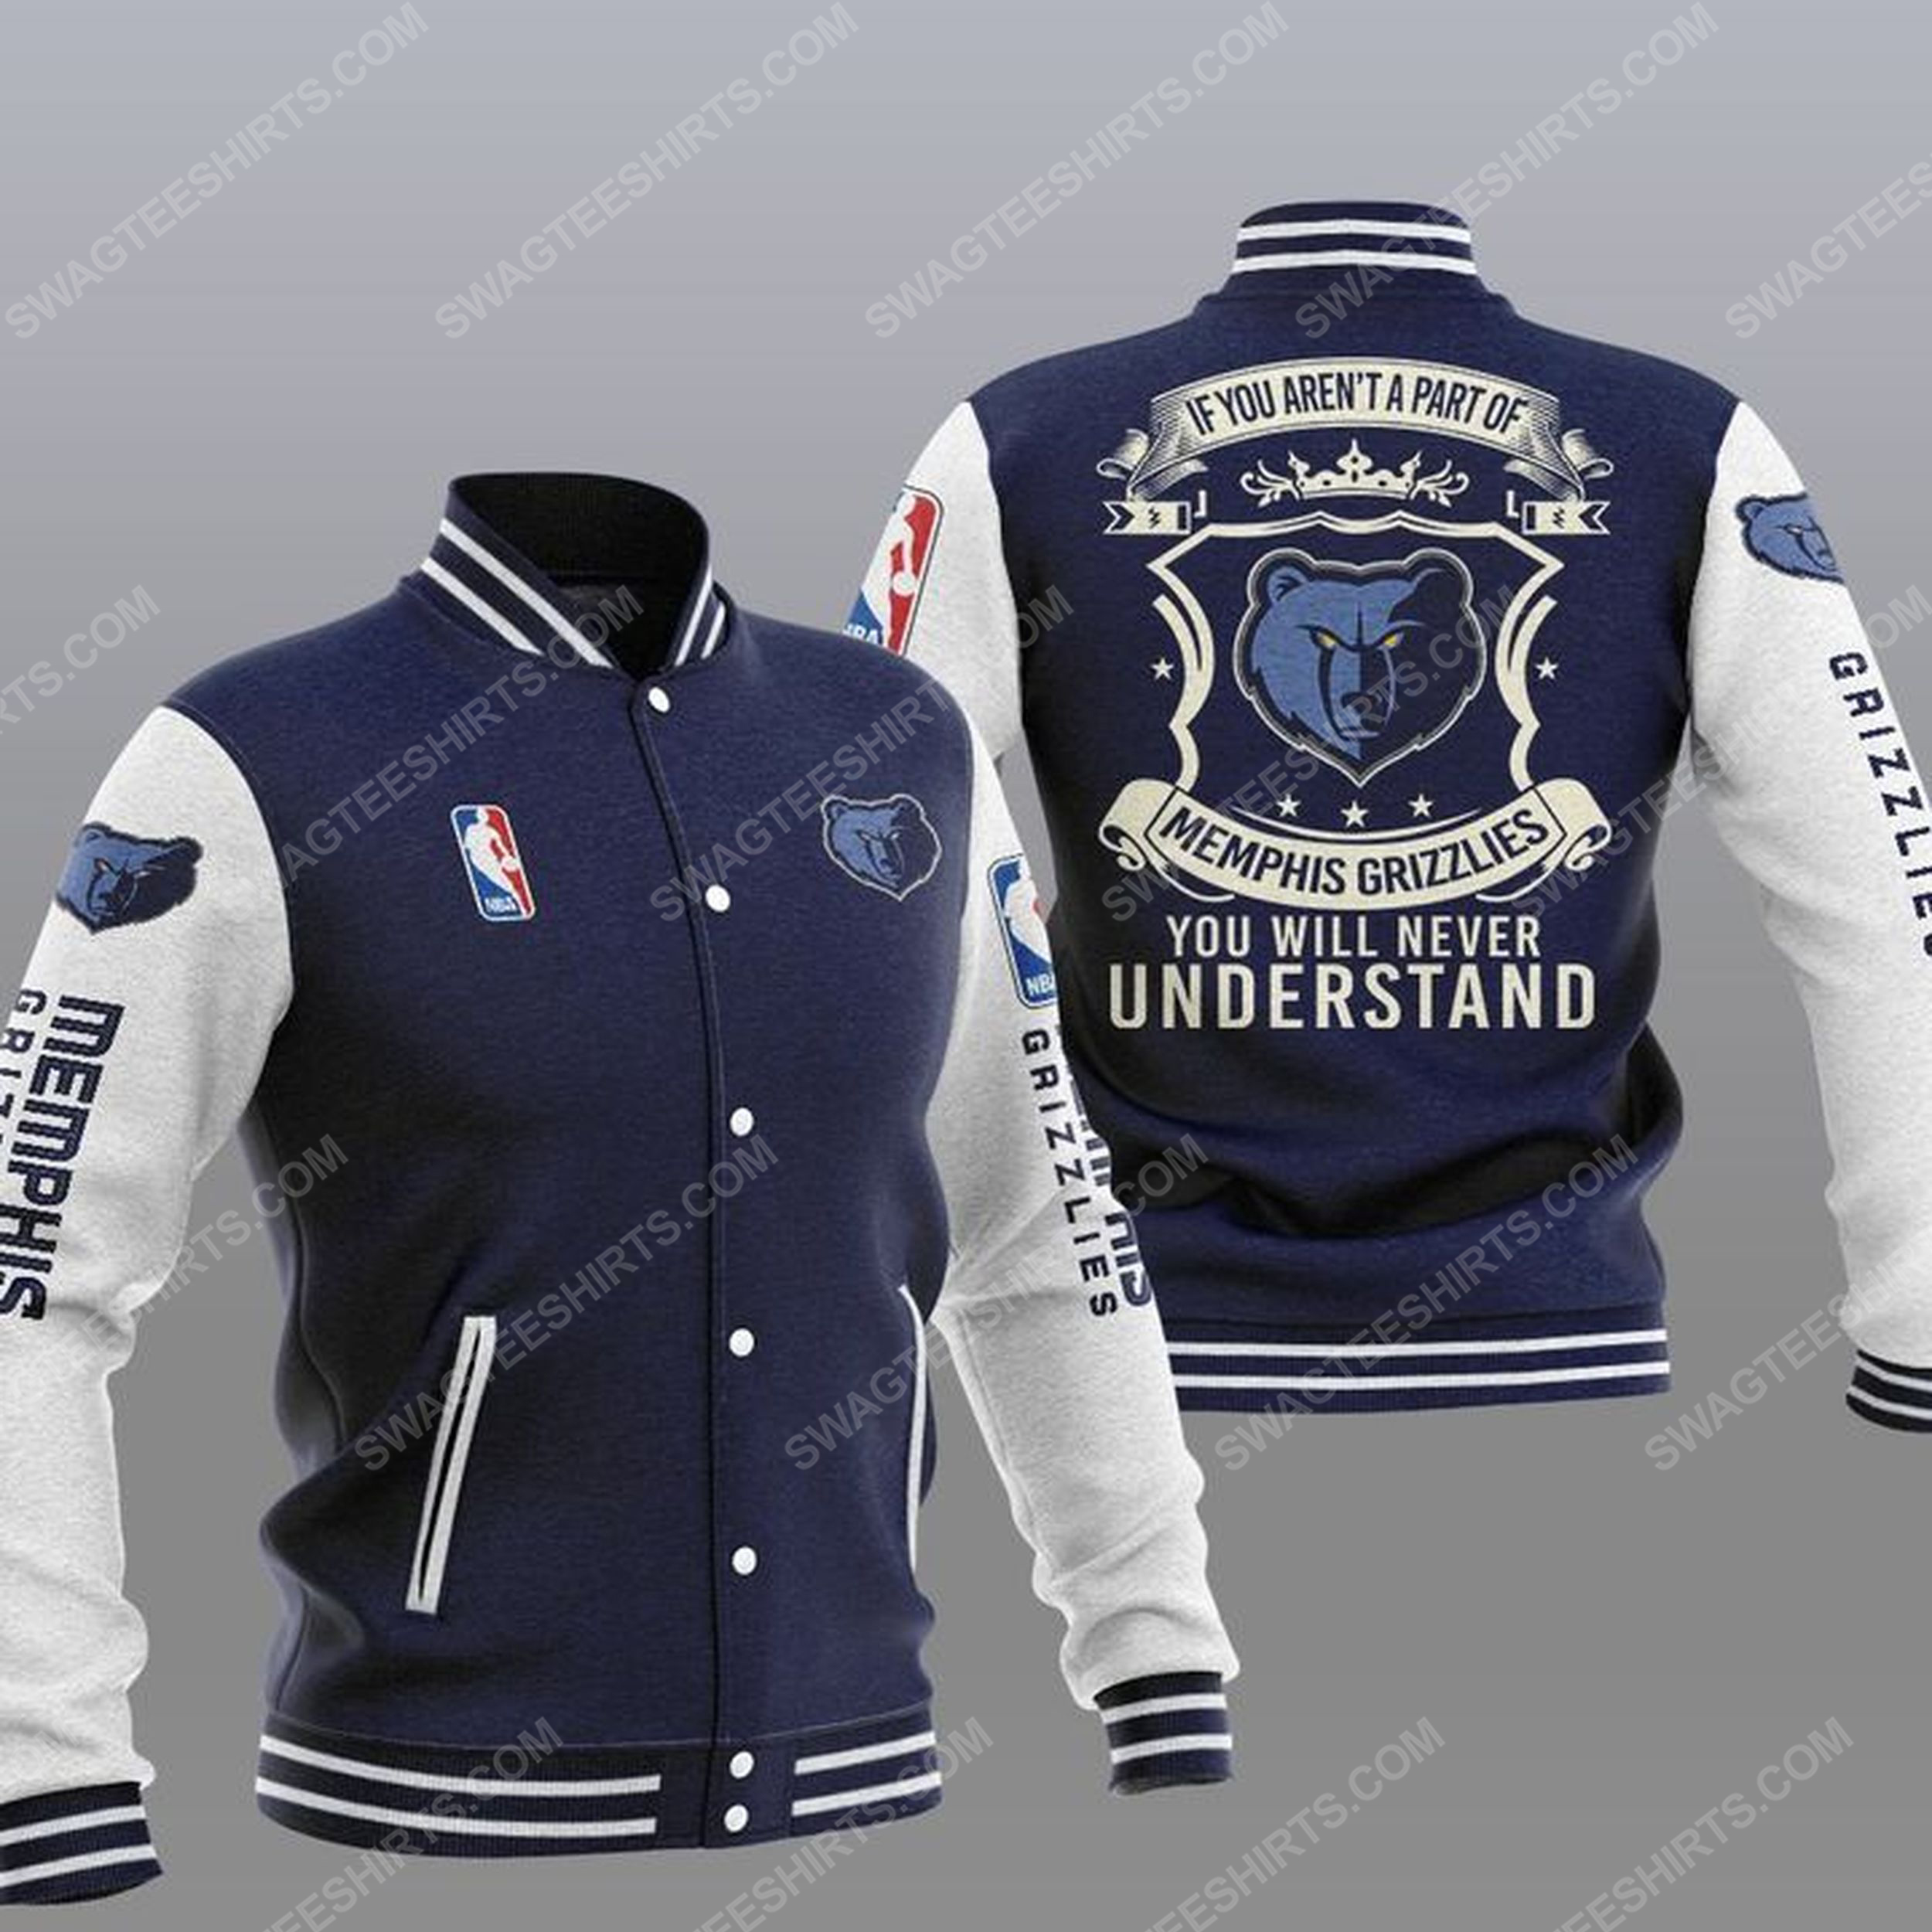 You will never understand memphis grizzlies all over print baseball jacket - navy 1